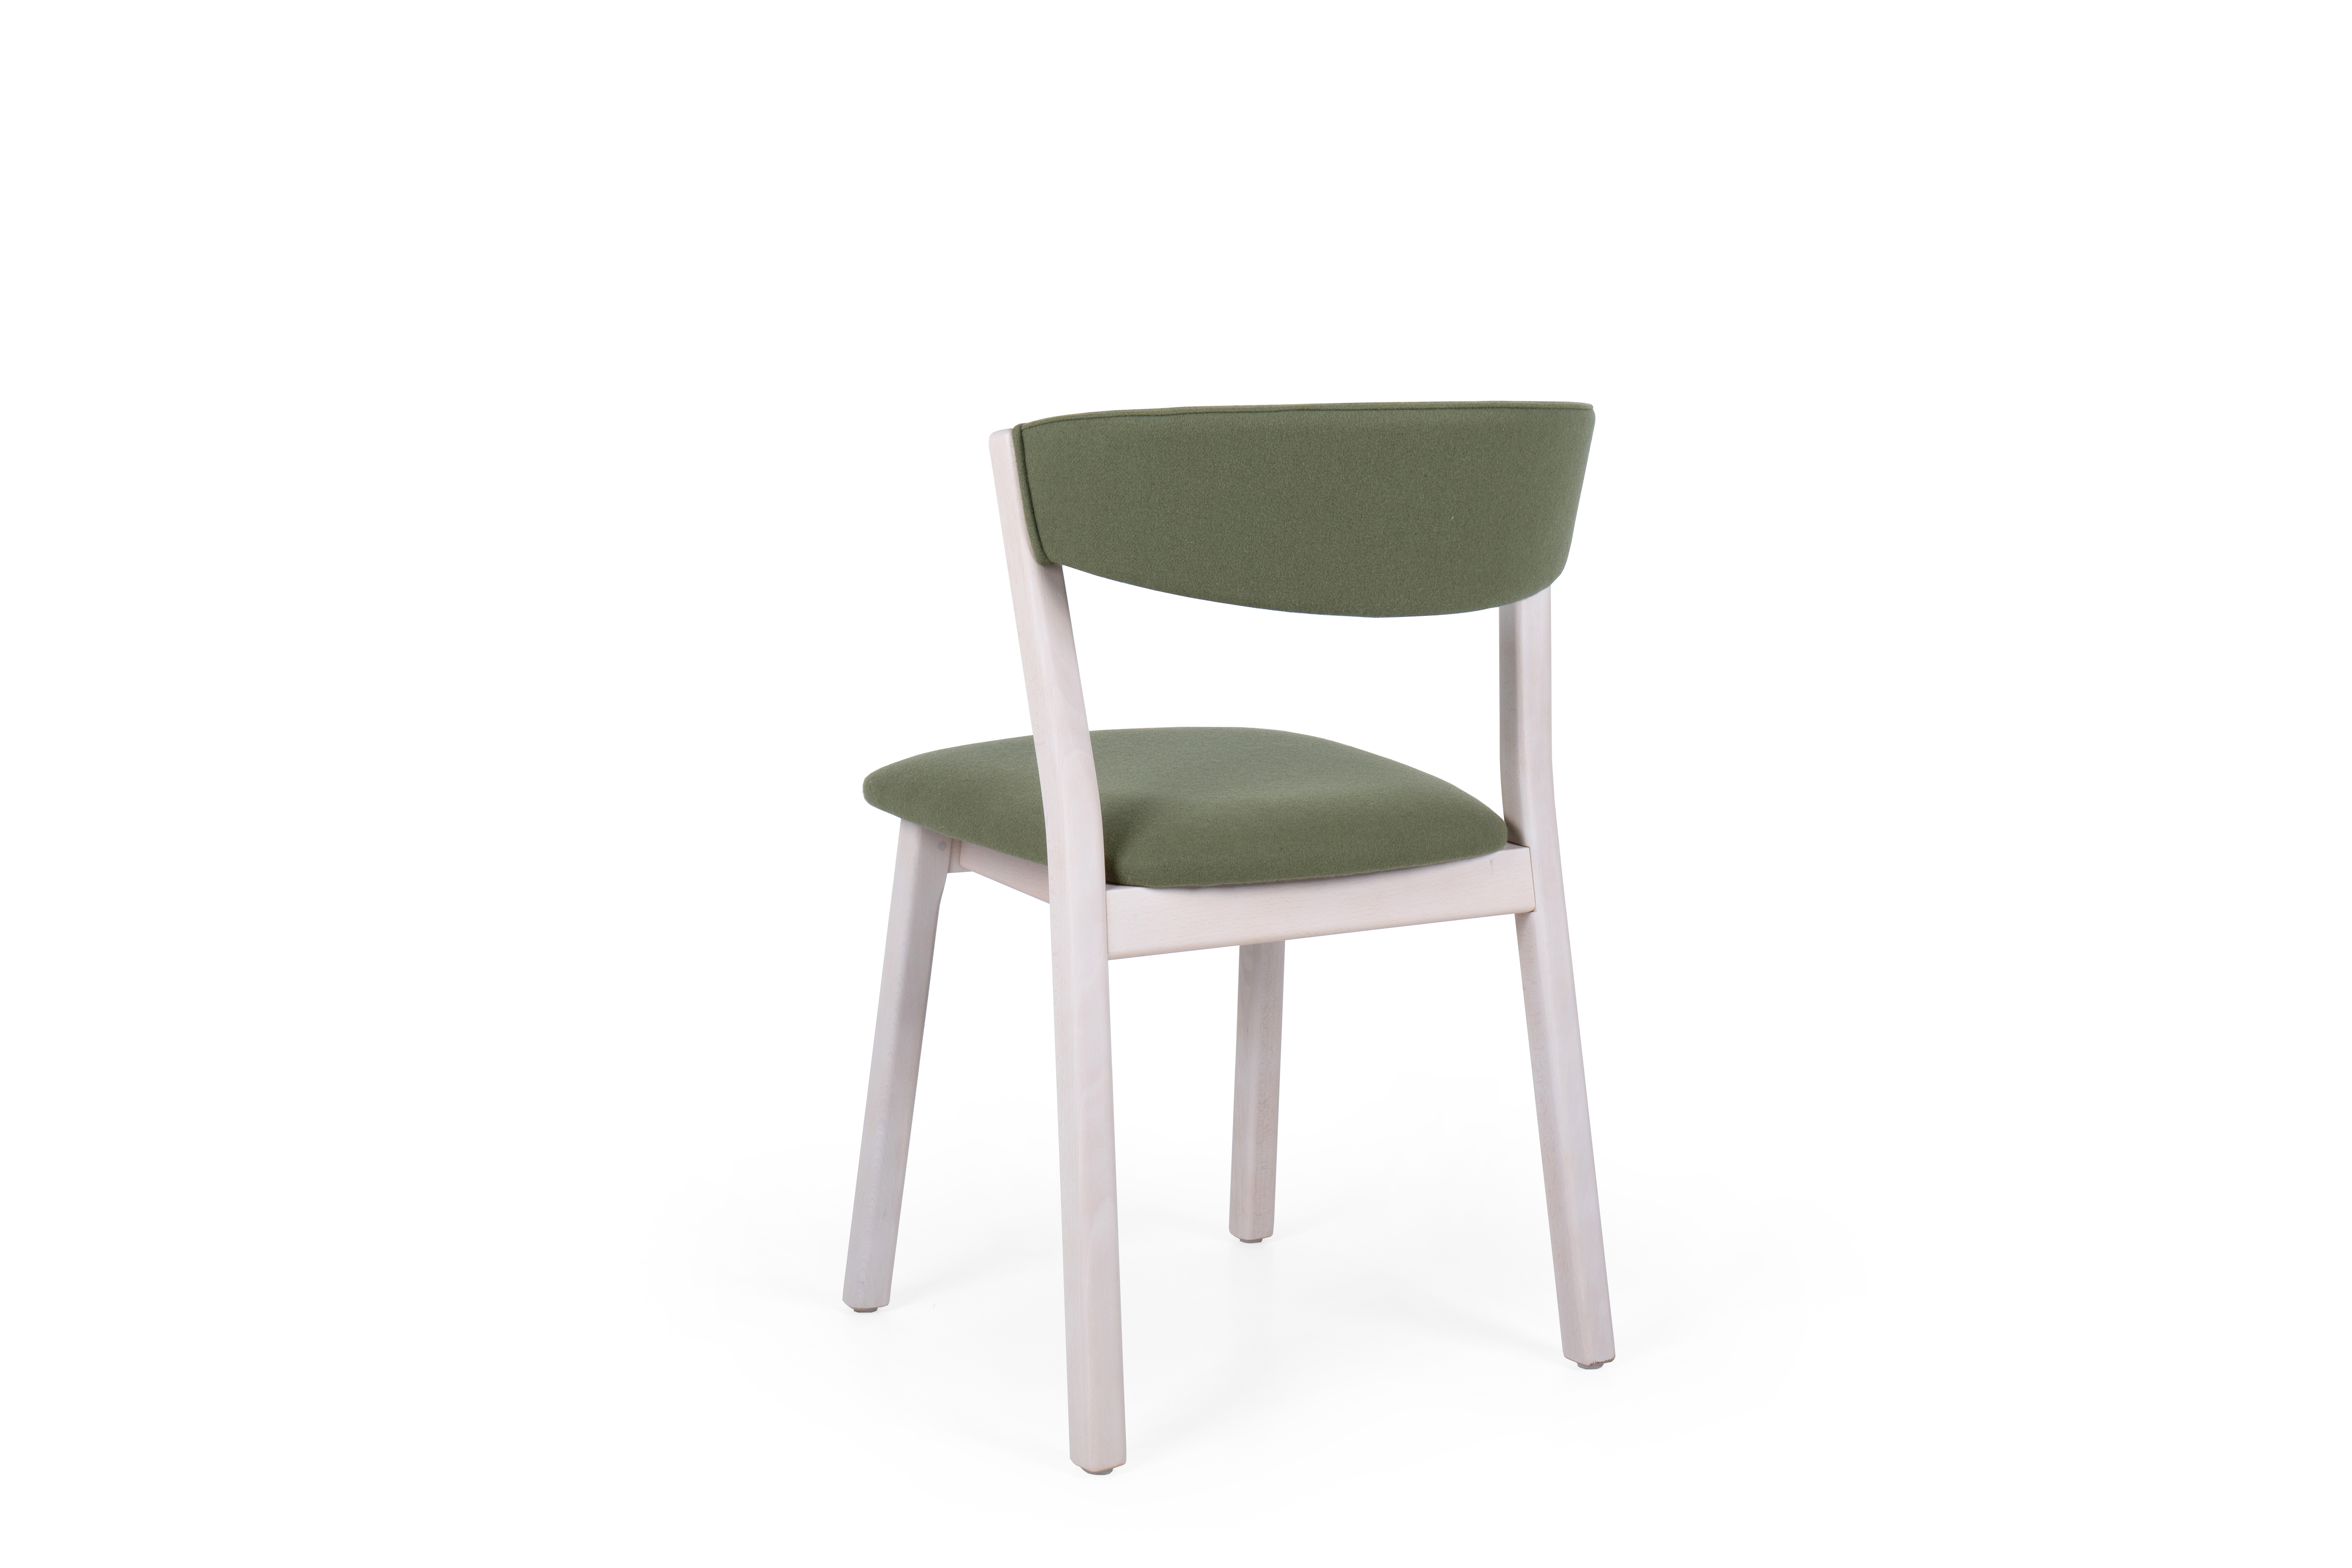 Eva Chair Cafe Seating